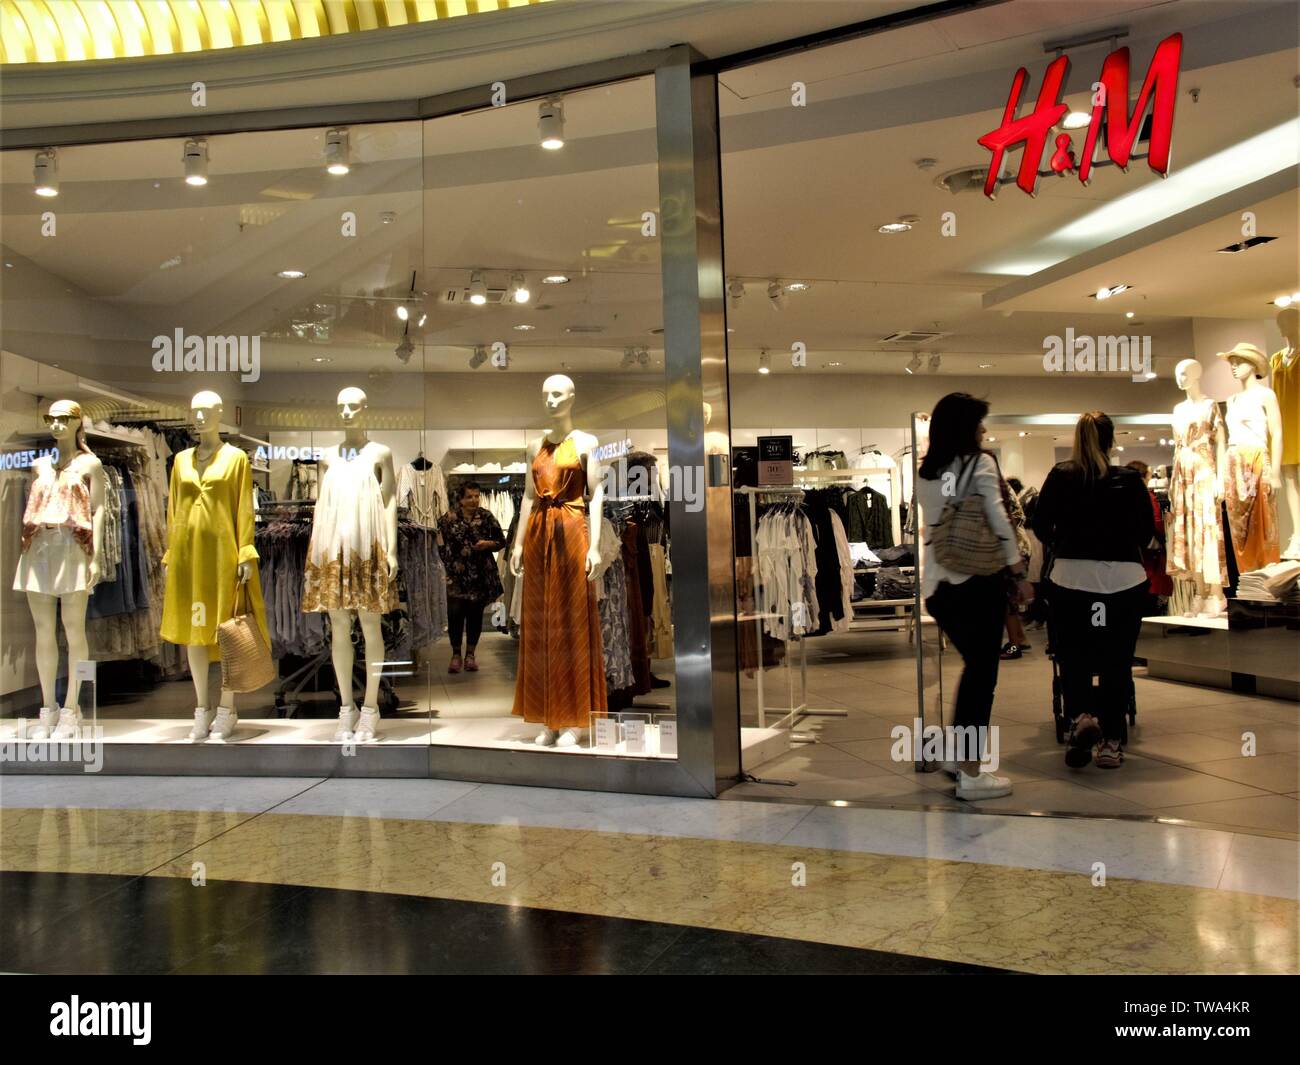 H&M FASHION STORE ENTRANCE IN EUROMA 2 SHOPPING CENTER IN ROME Stock Photo  - Alamy